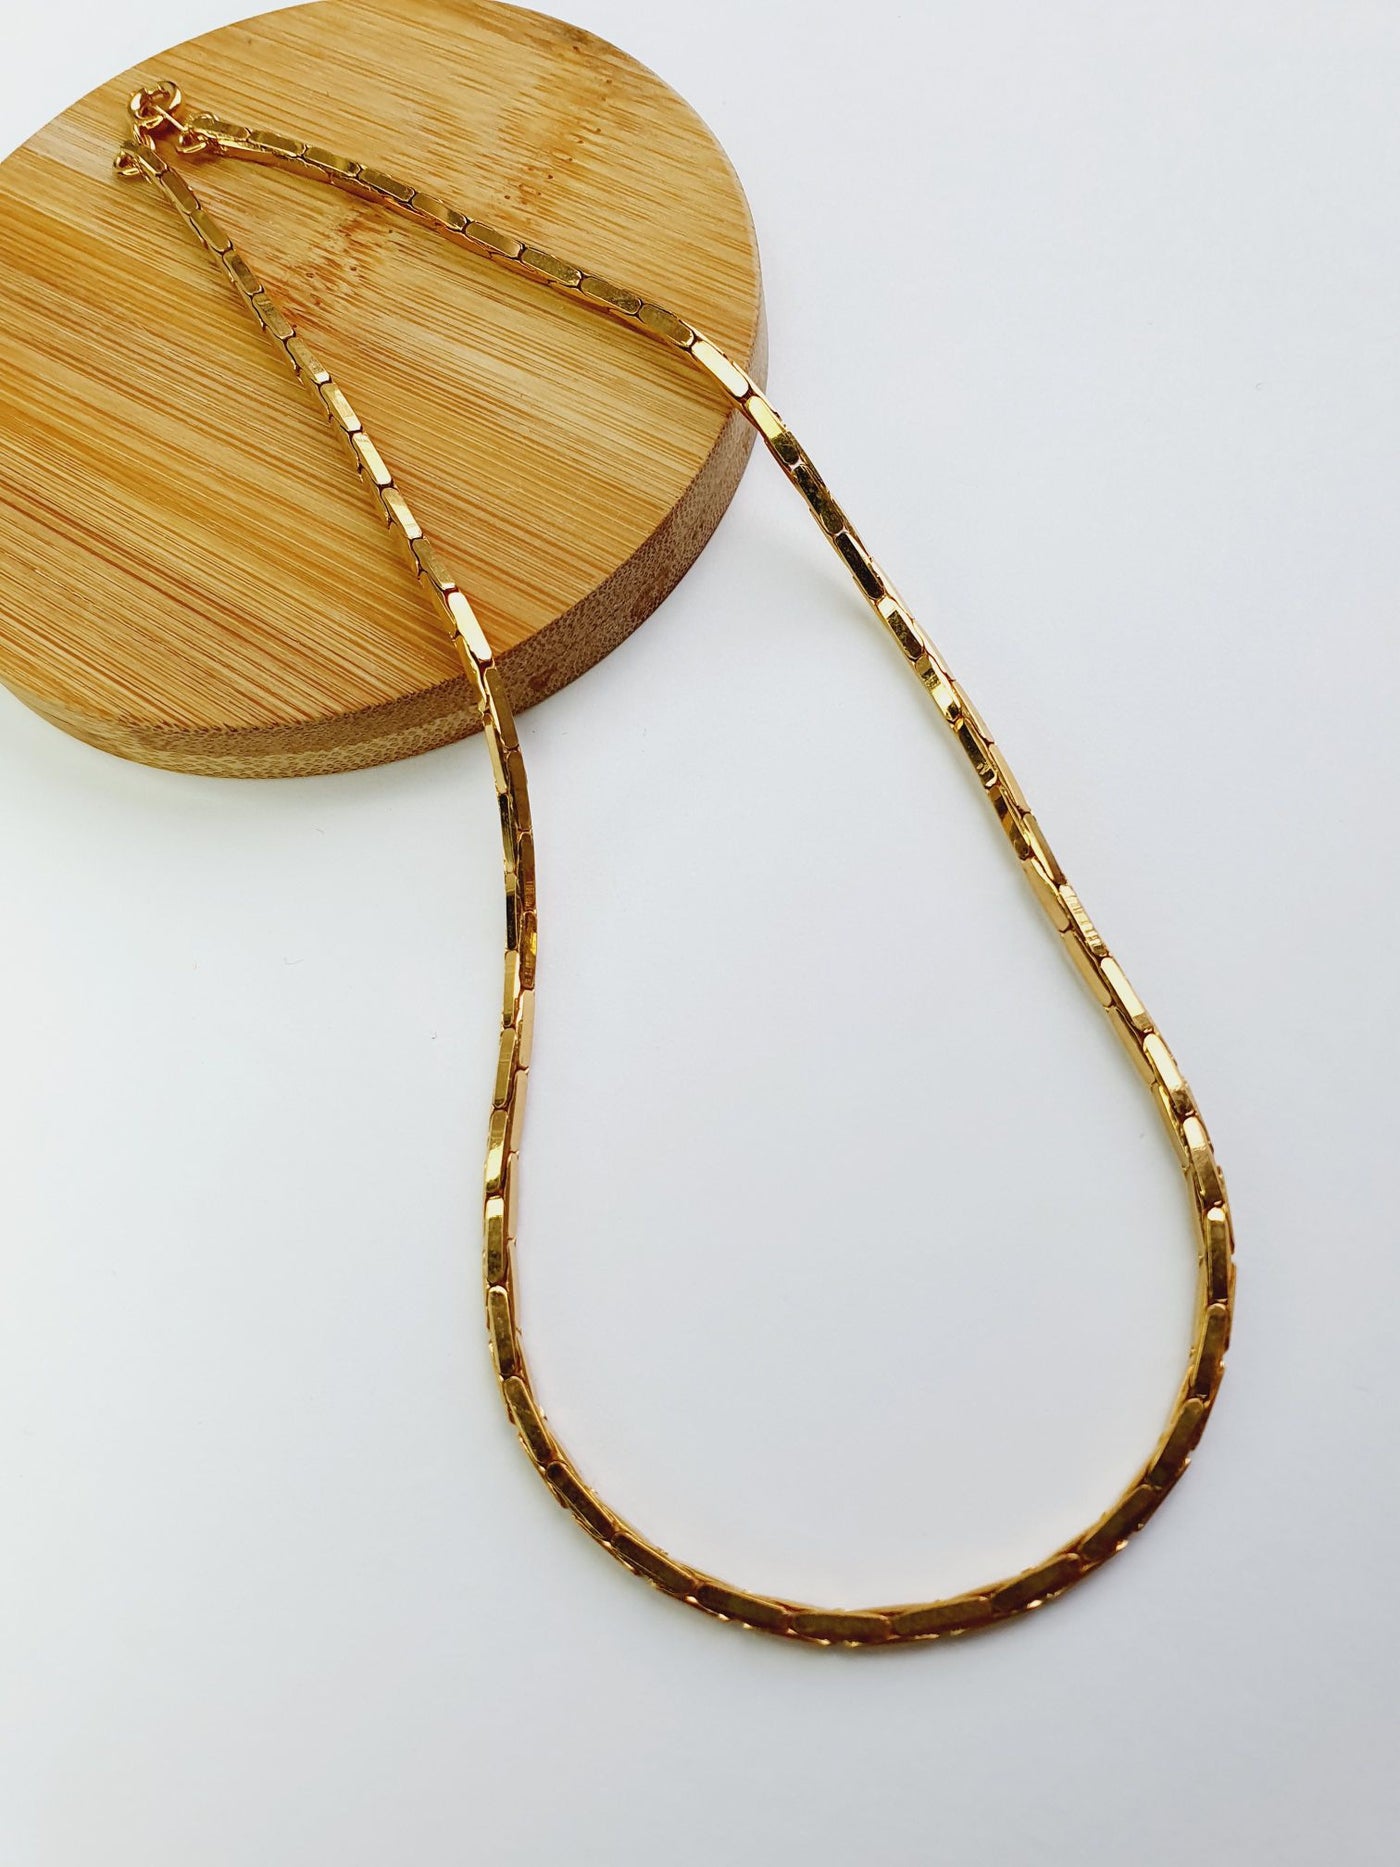 Vintage Gold Plated Square Chain Necklace